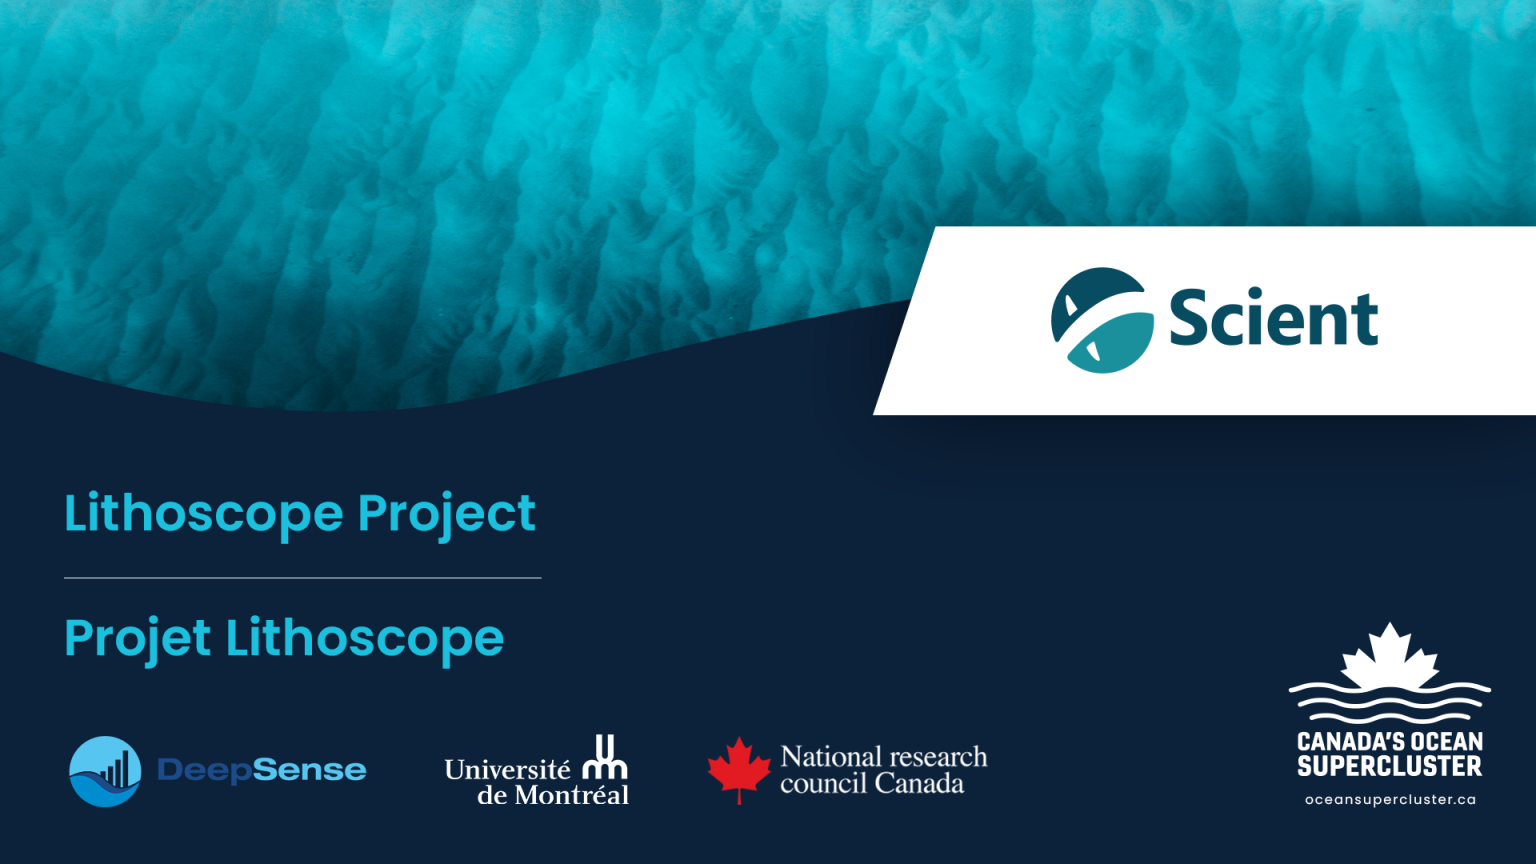 Canada’s Ocean Supercluster Funds Scient Analytics Inc.'s Lithoscope Project: Next generation of multi-modal sediment characterization solution